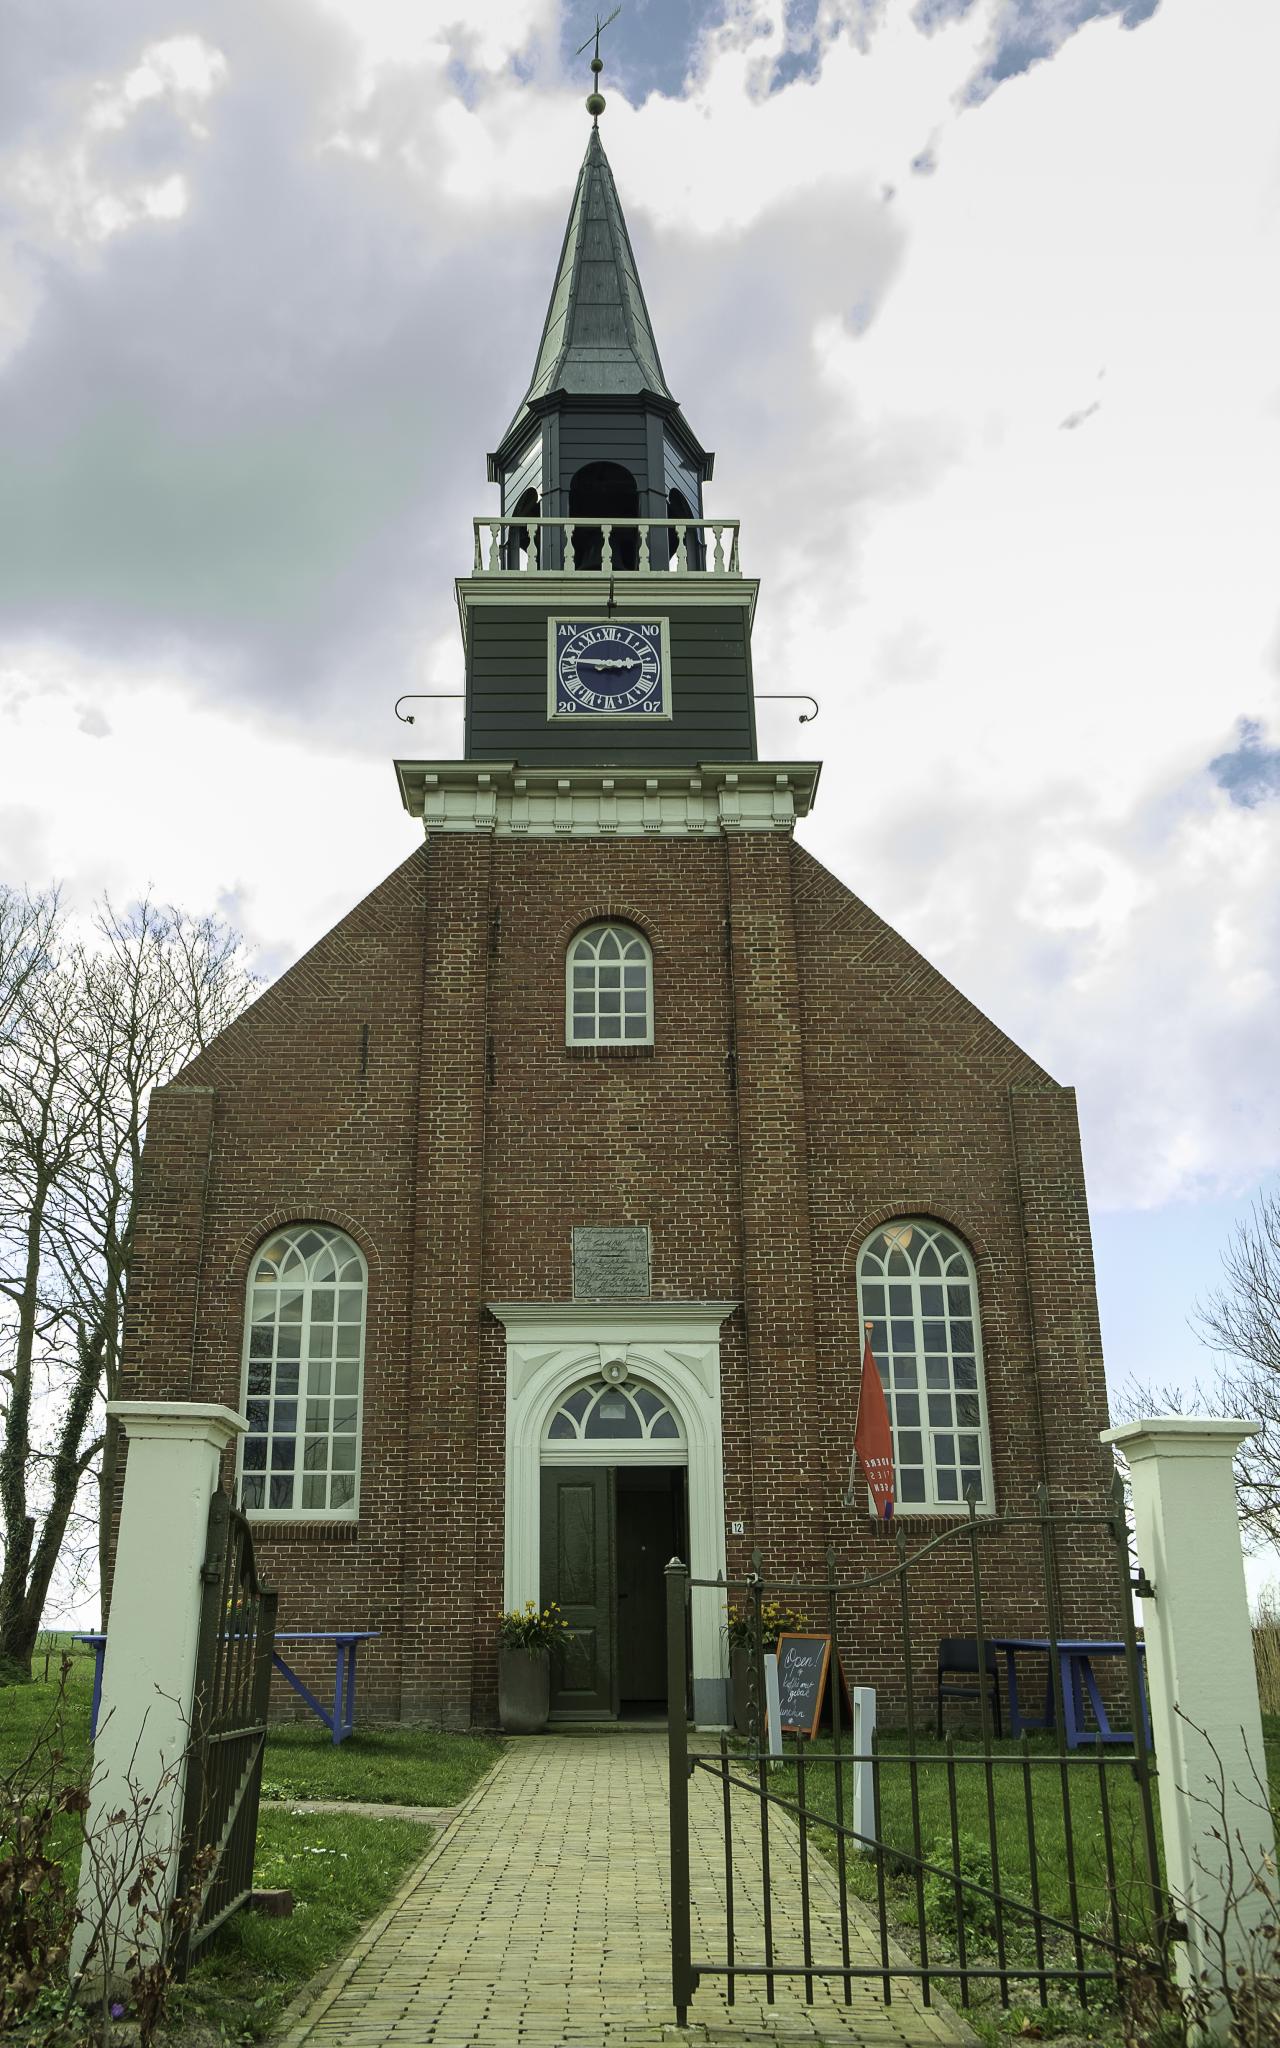 Brick church with pointed roof turret